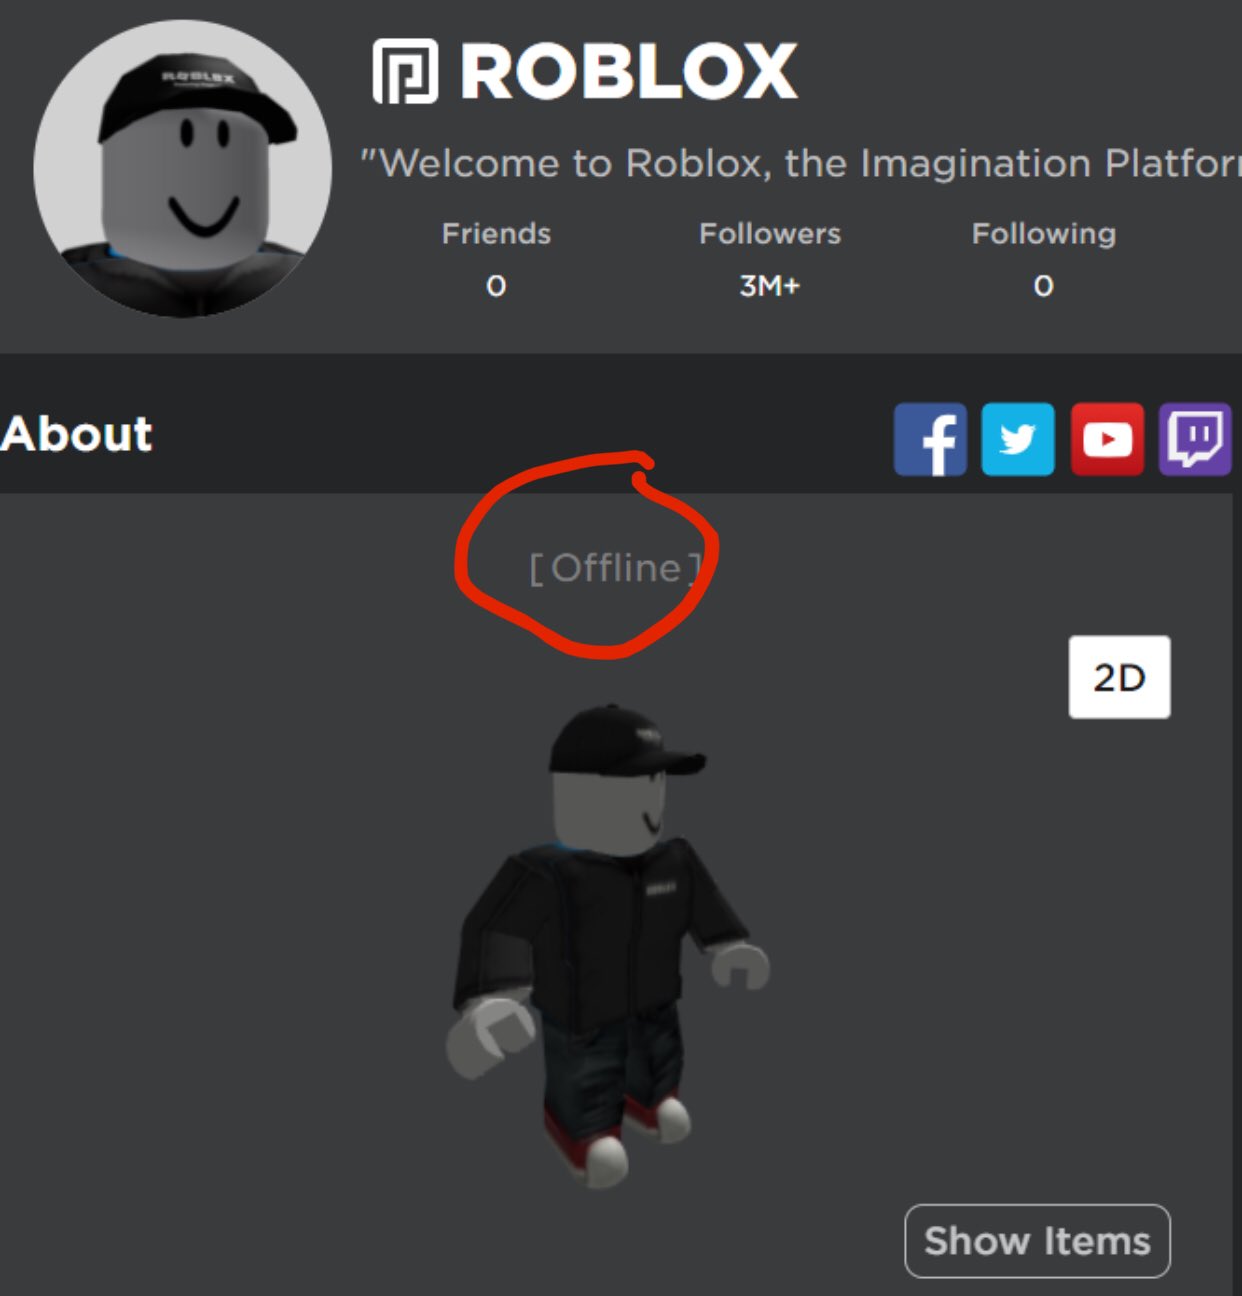 News Roblox On Twitter But Roblox Is Offline Look - reaps isnt cool on twitter yknow how roblox youtubers